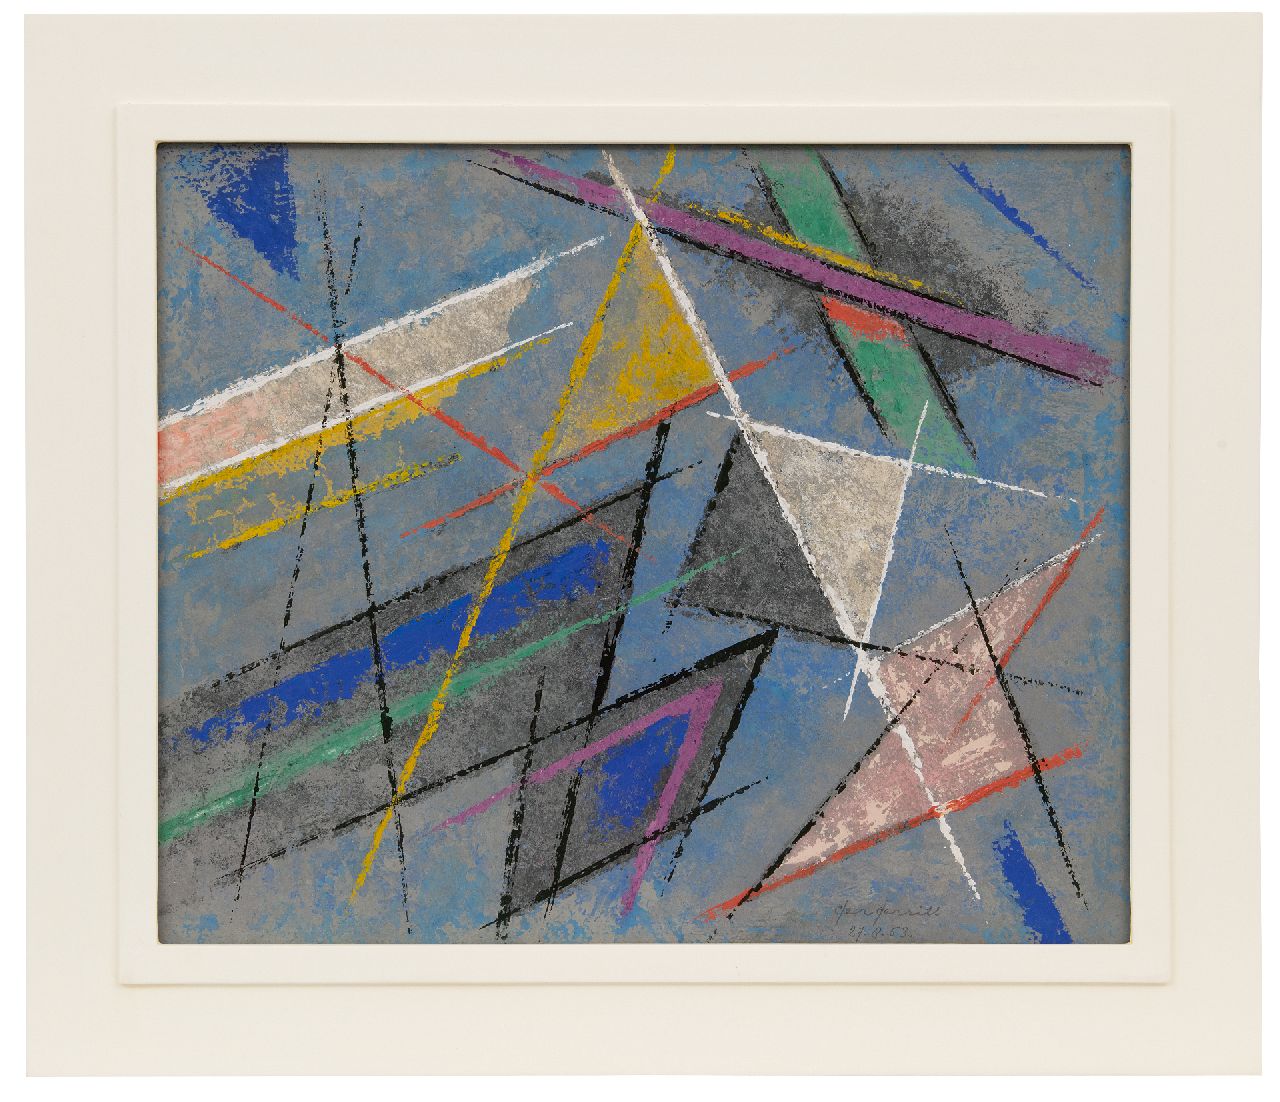 Gerrits G.J.  | Gerrit Jacobus 'Ger' Gerrits | Watercolours and drawings offered for sale | Composition with triangles, pastel and gouache on paper 42.0 x 53.0 cm, signed l.r. and dated 27.8.53.